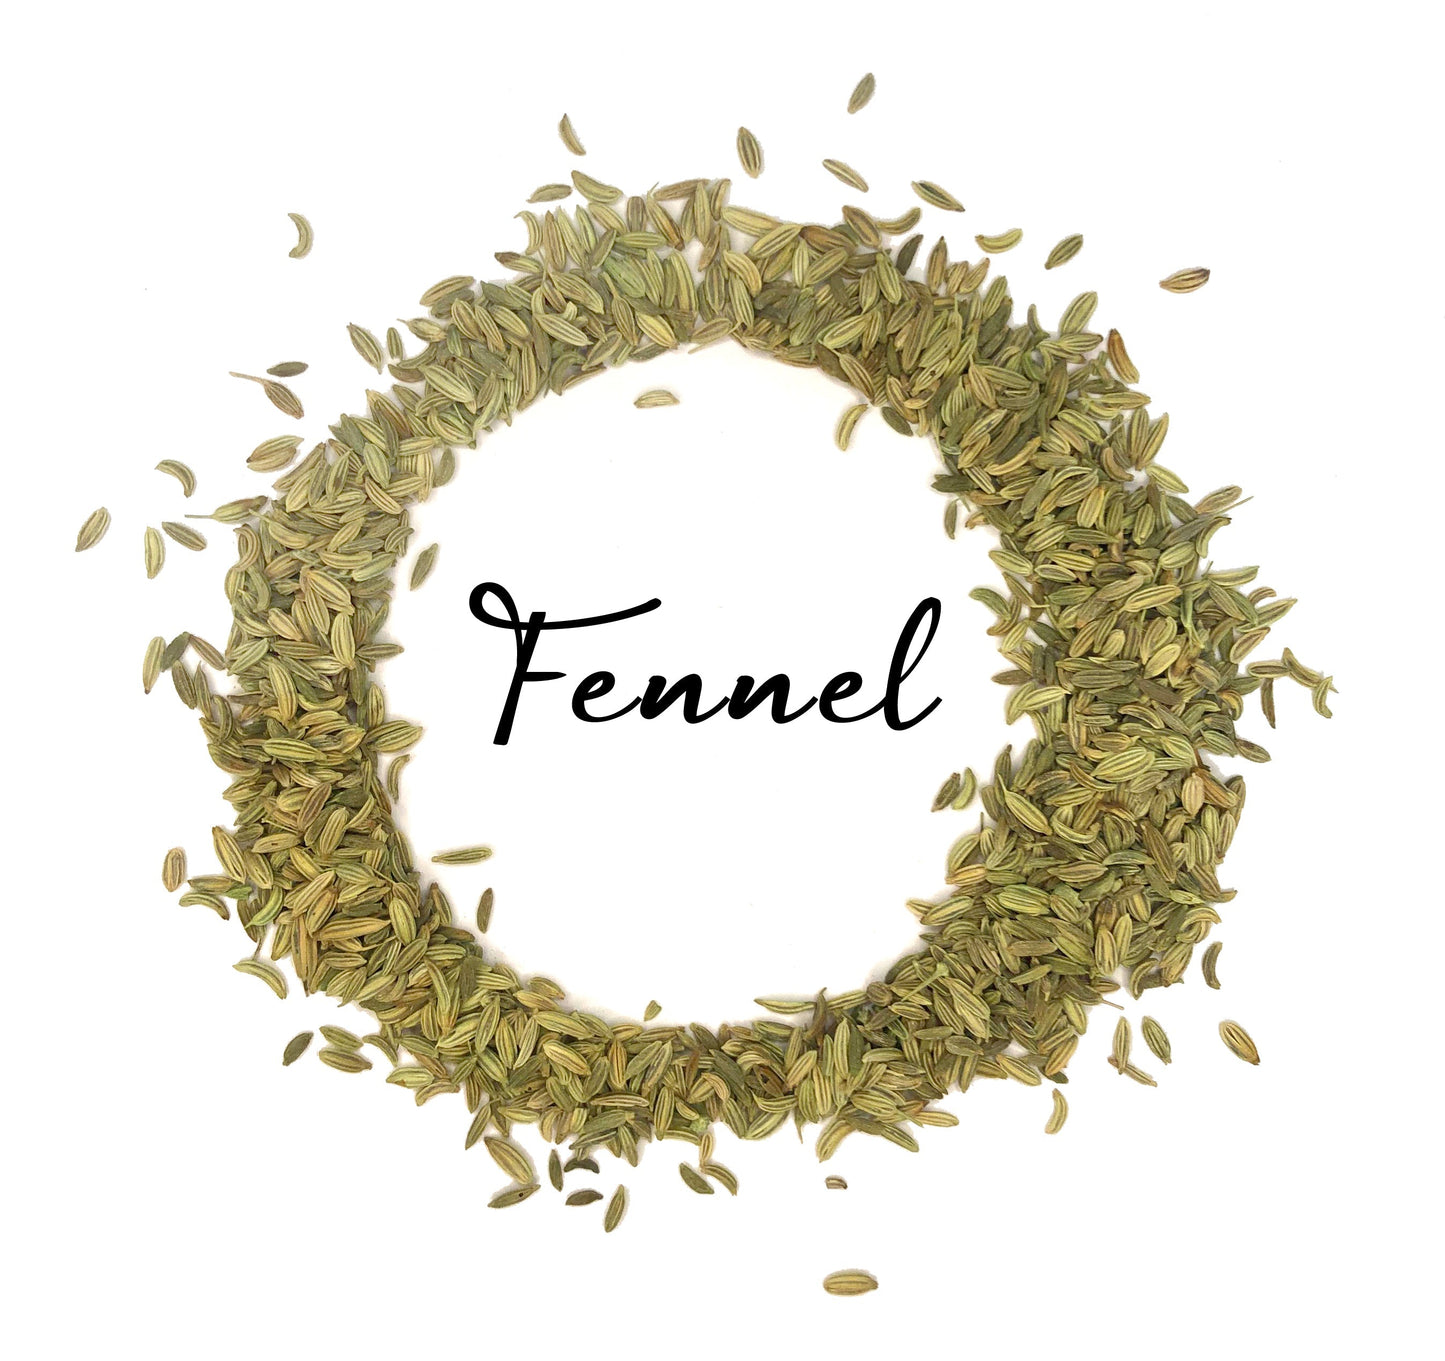 Wholesale Spices & Herbs - Fennel Seed Whole, Organic 8oz(227g) Bag